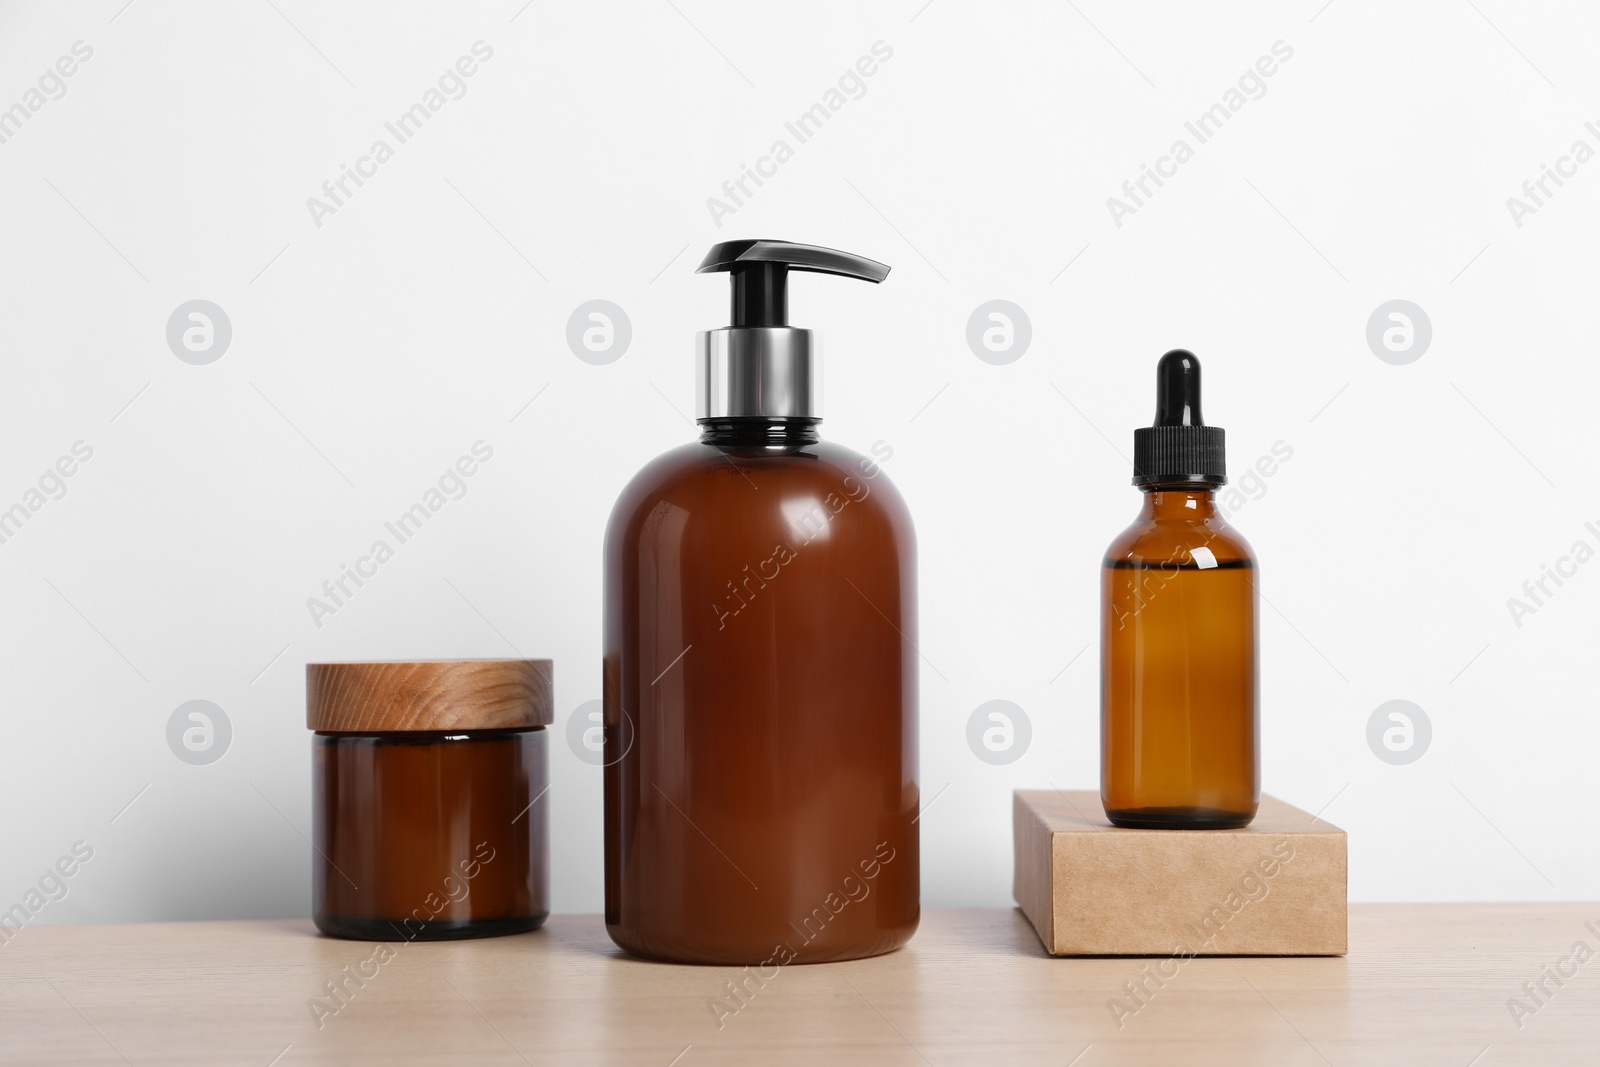 Photo of Bottles with different cosmetic products on wooden table